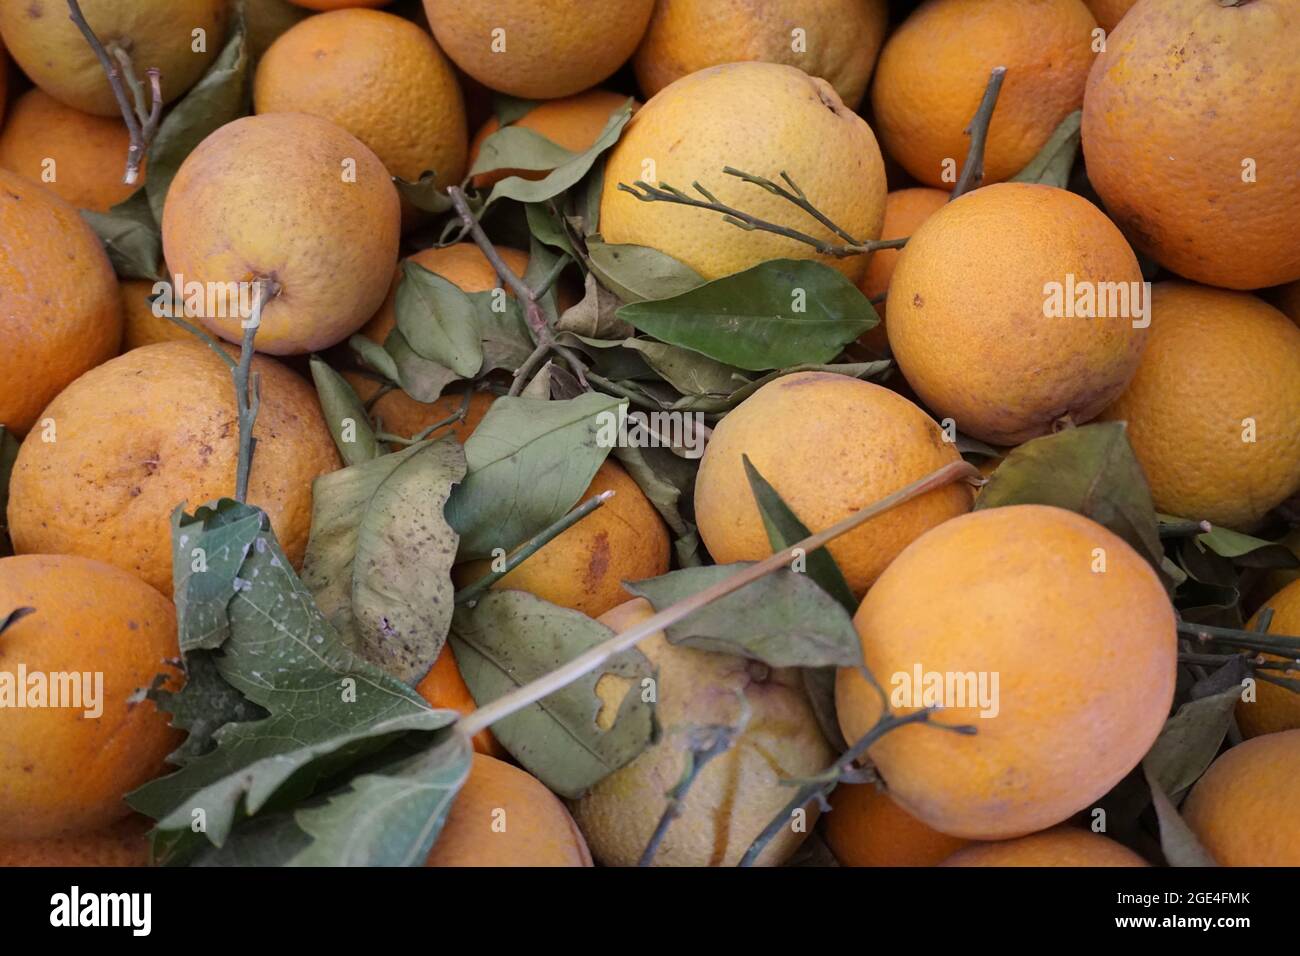 Valencia Orange coming from Morocco, Natural Fruit,in the market,Healthy Orange fruits, ,ready to consume Stock Photo